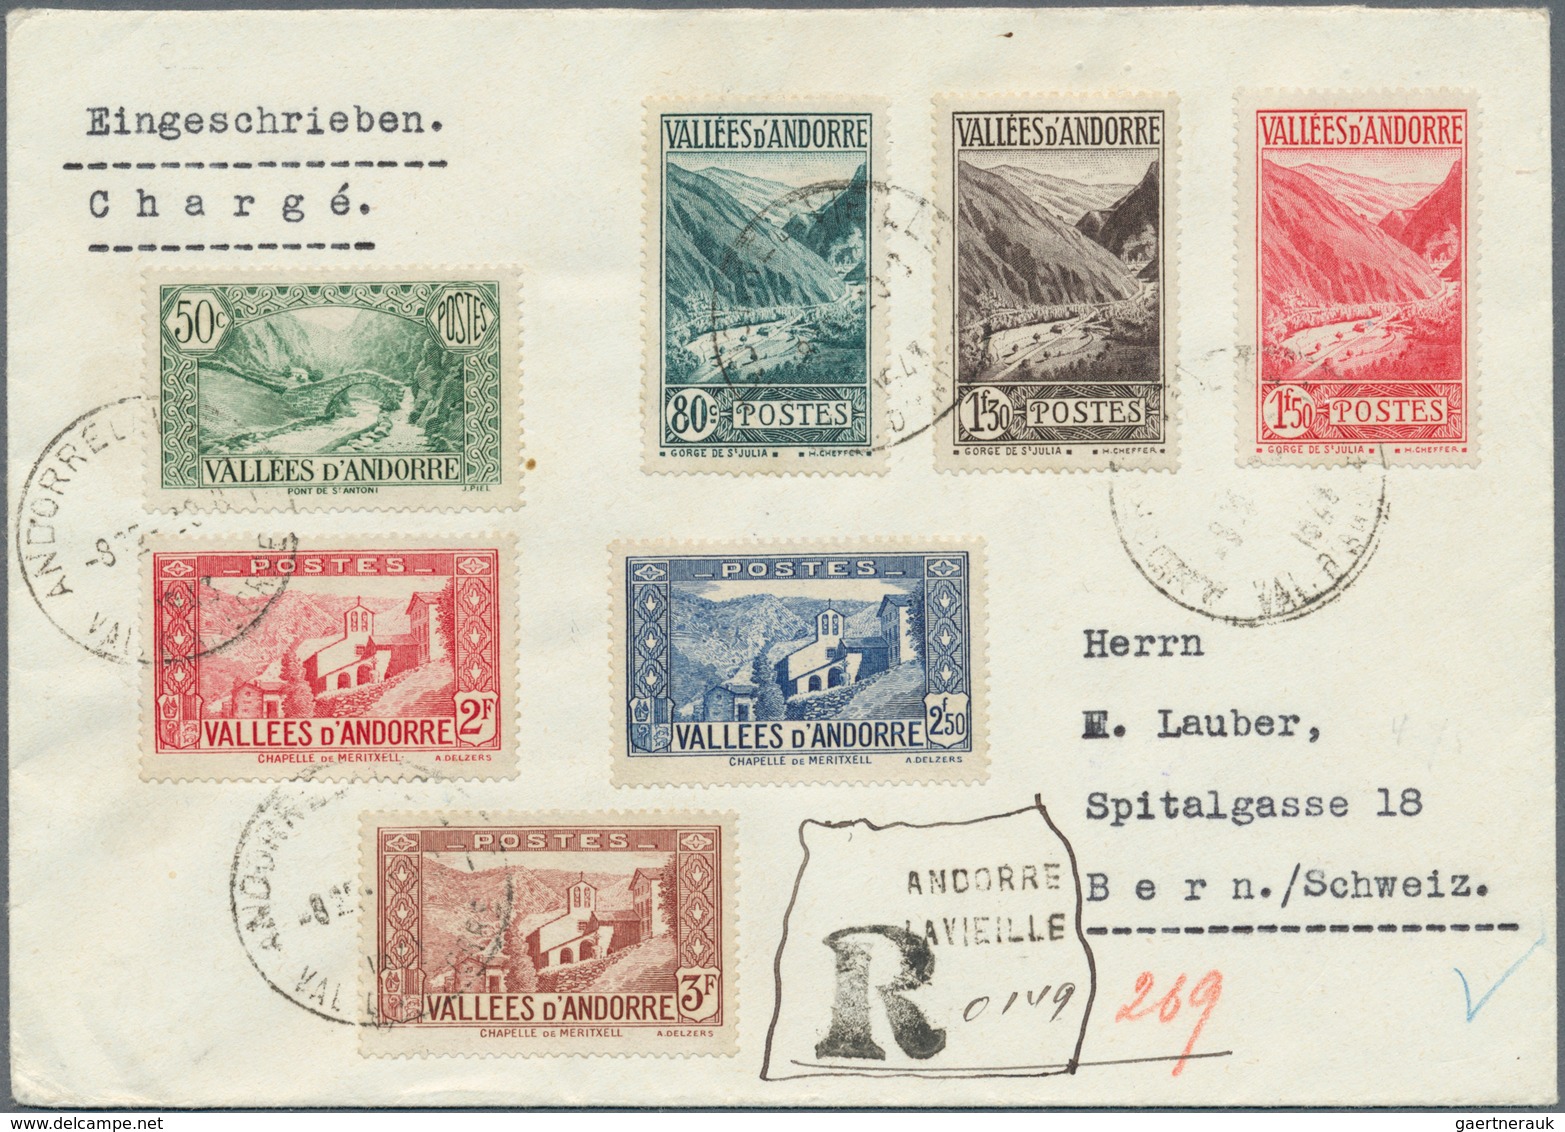 Andorra - Französische Post: 1932-70, Collection of 25 covers, postcards and FDC from French and Spa